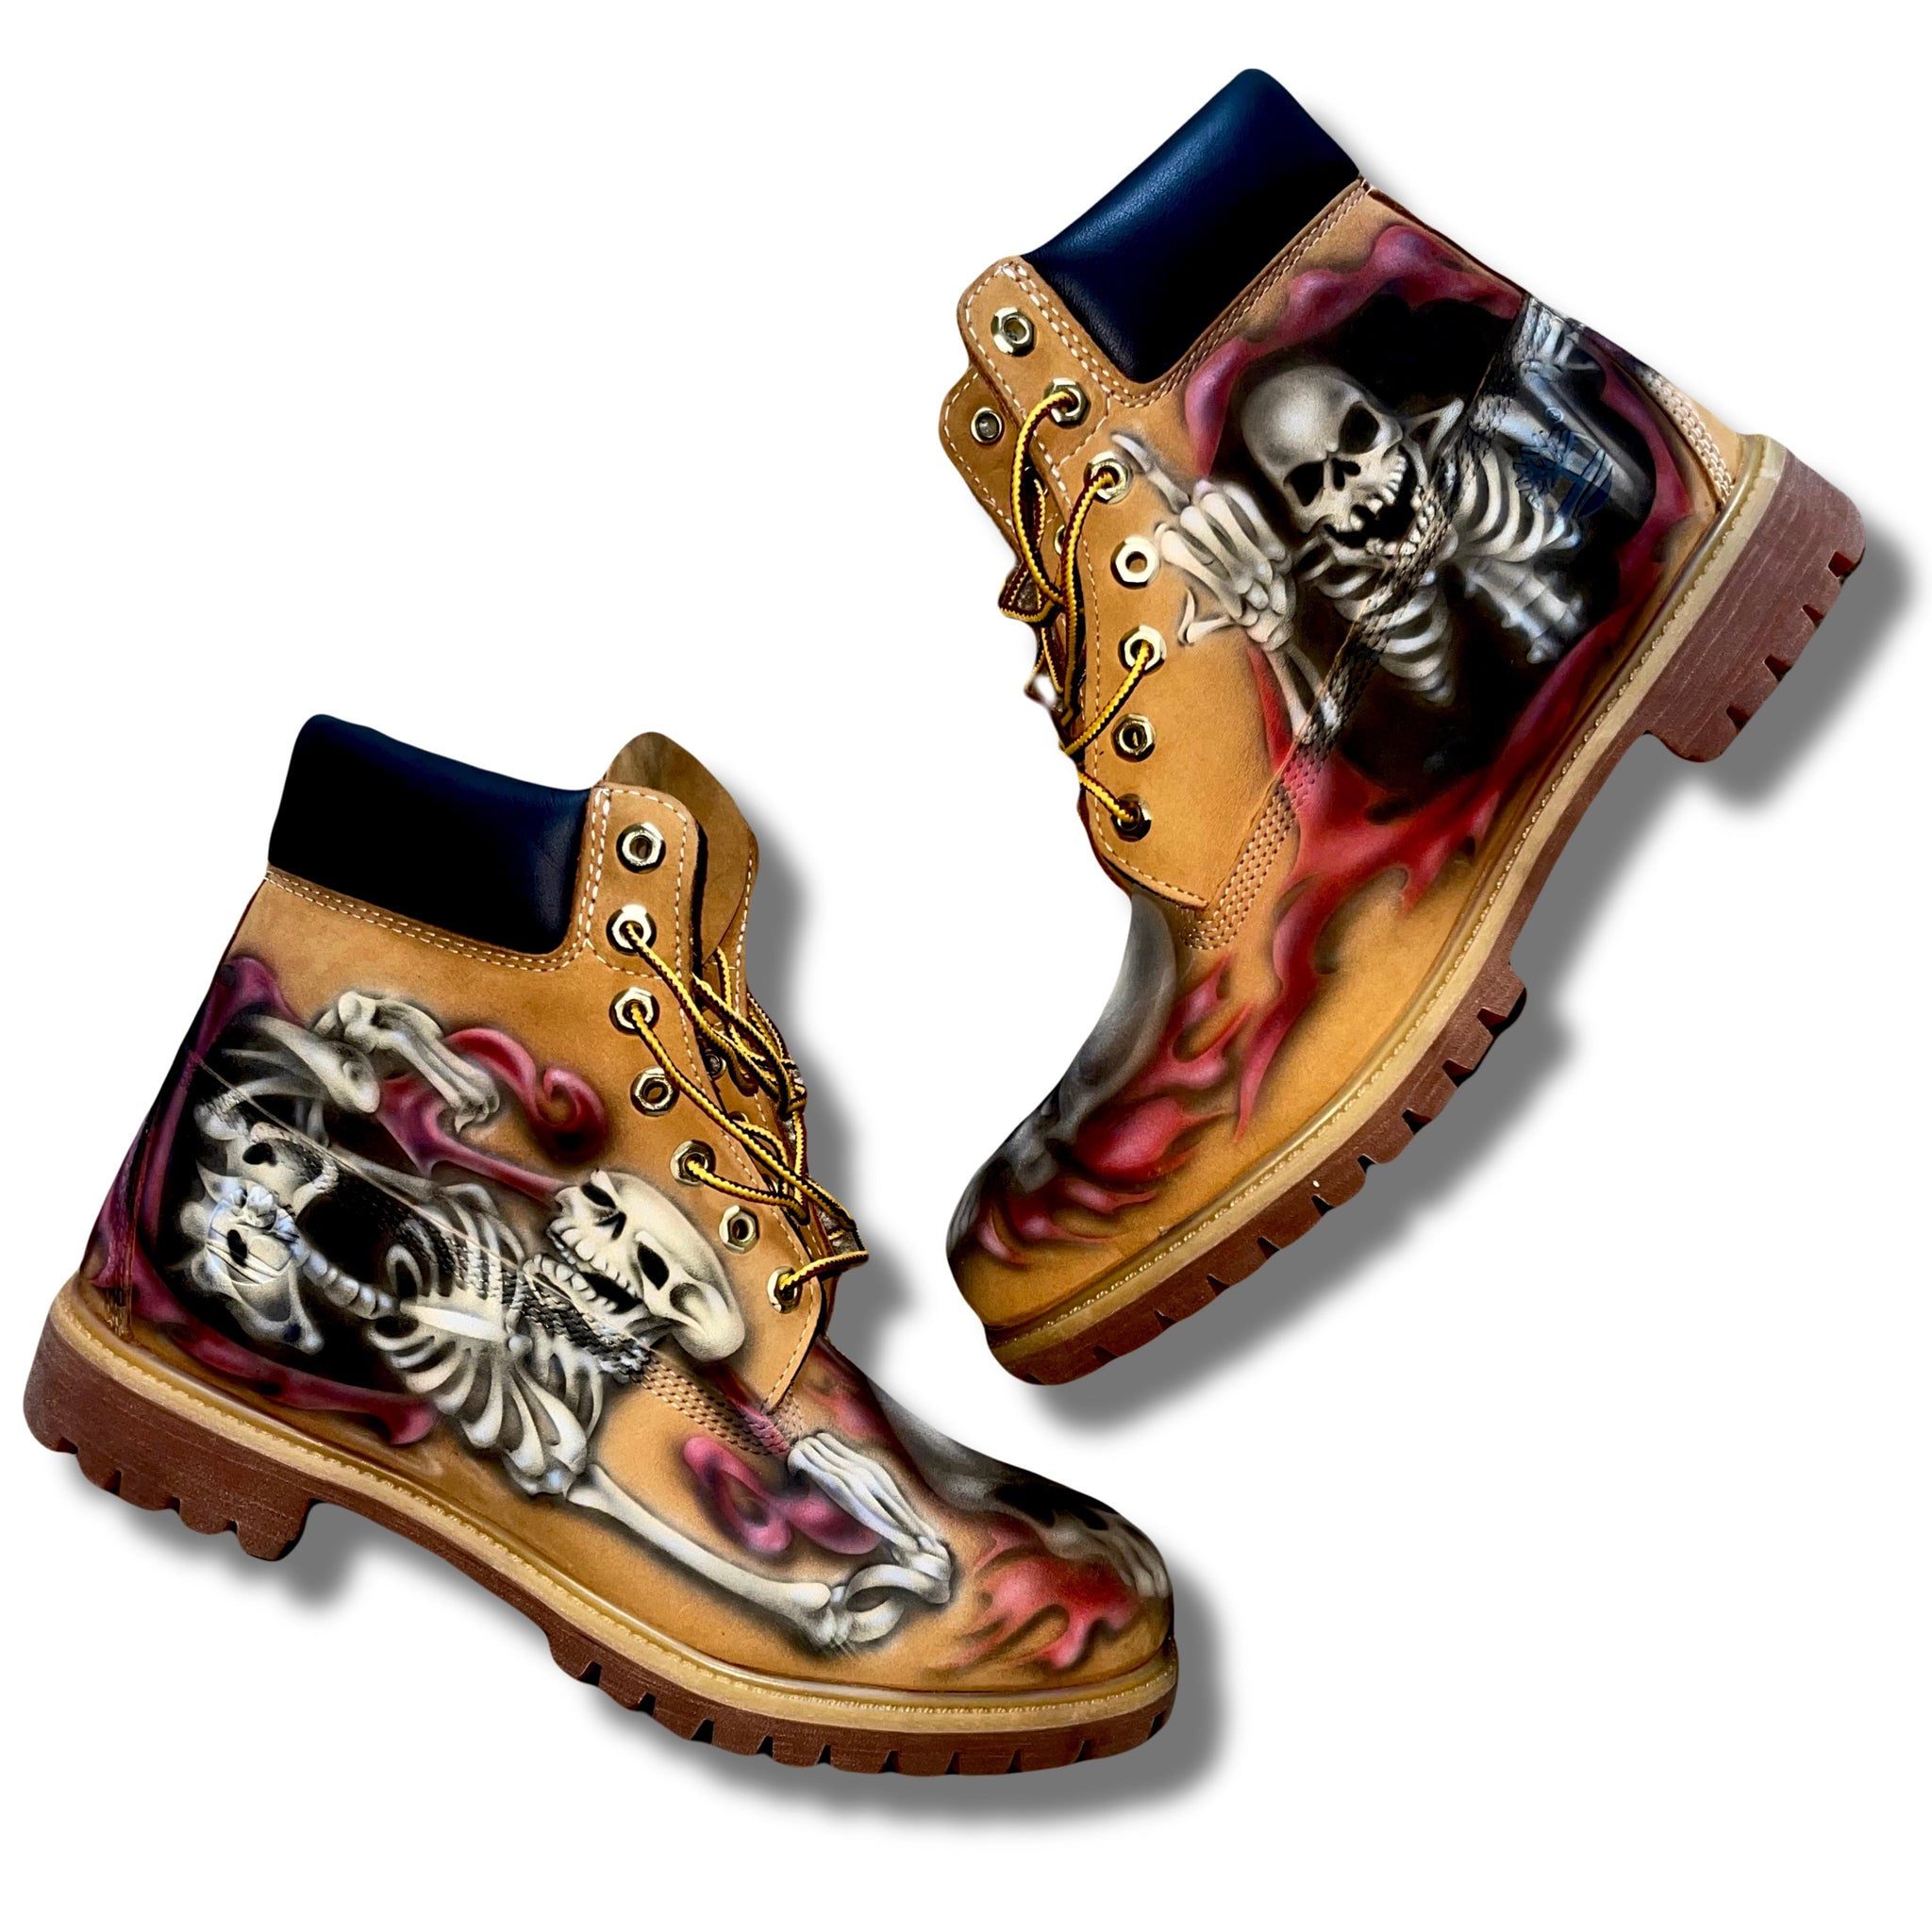 1/1 airbrushed Timberland Boots (11.5)